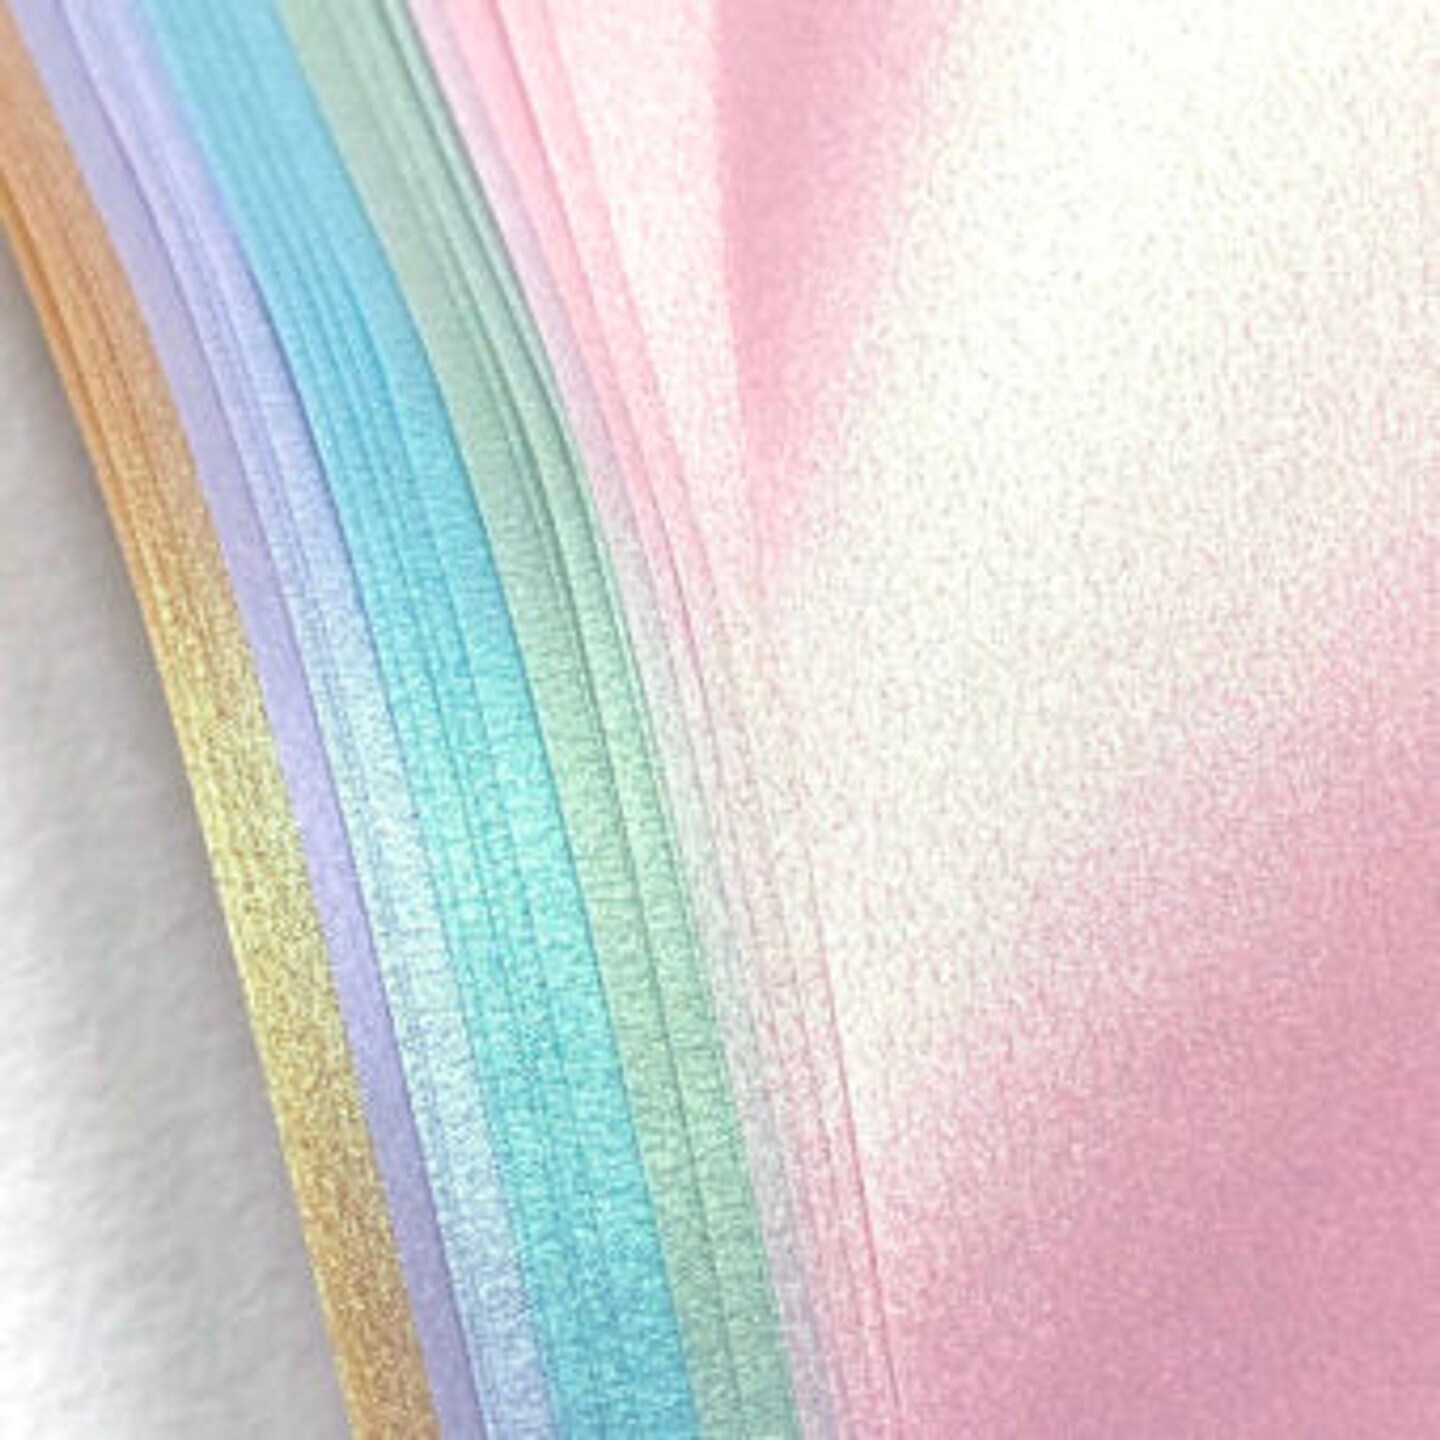 Et Cetera Papers Shimmer Vellum 12x12 - Spring Assortment - 5 Sheets(1 each of 5 colors)